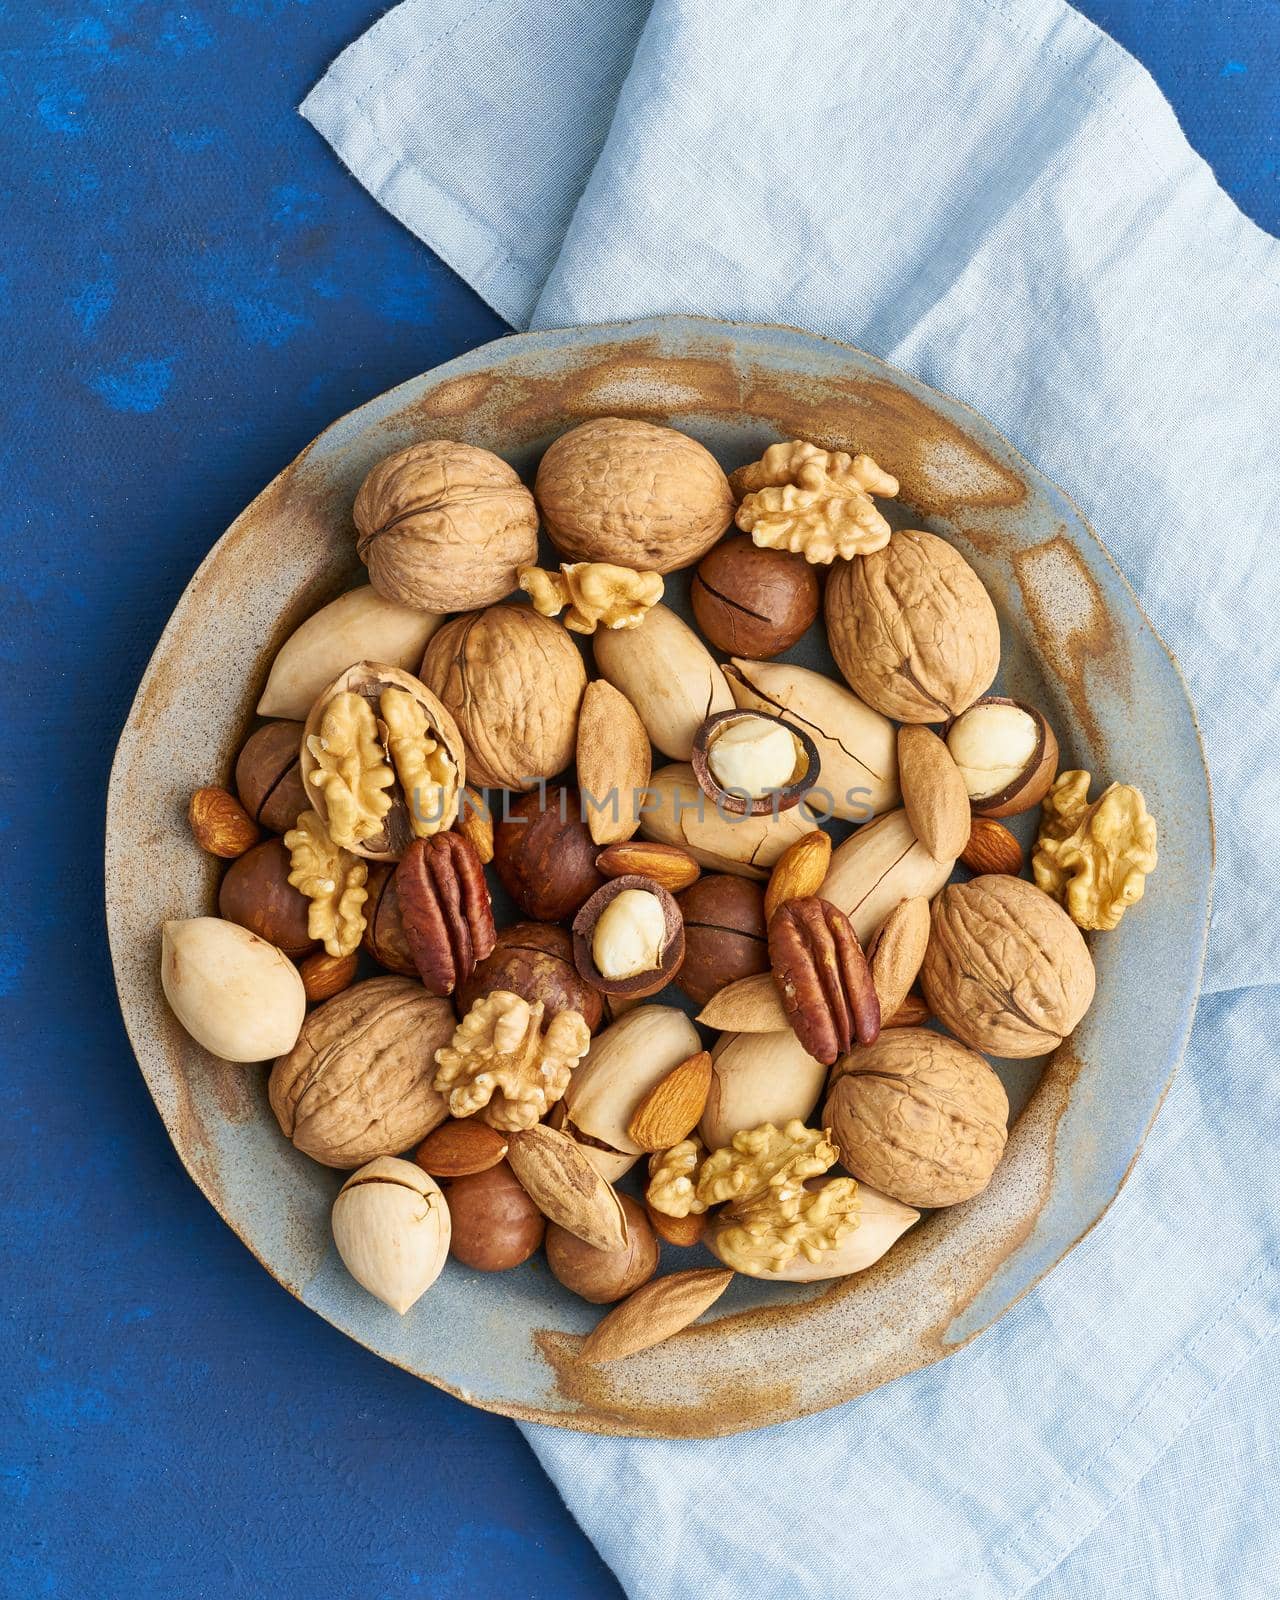 Classic blue in food. Mix of nuts on a plate - walnut, almonds, pecans, macadamia and knife for opening shell. Healthy vegan food. Clean eating, balanced diet. Top view, vertical